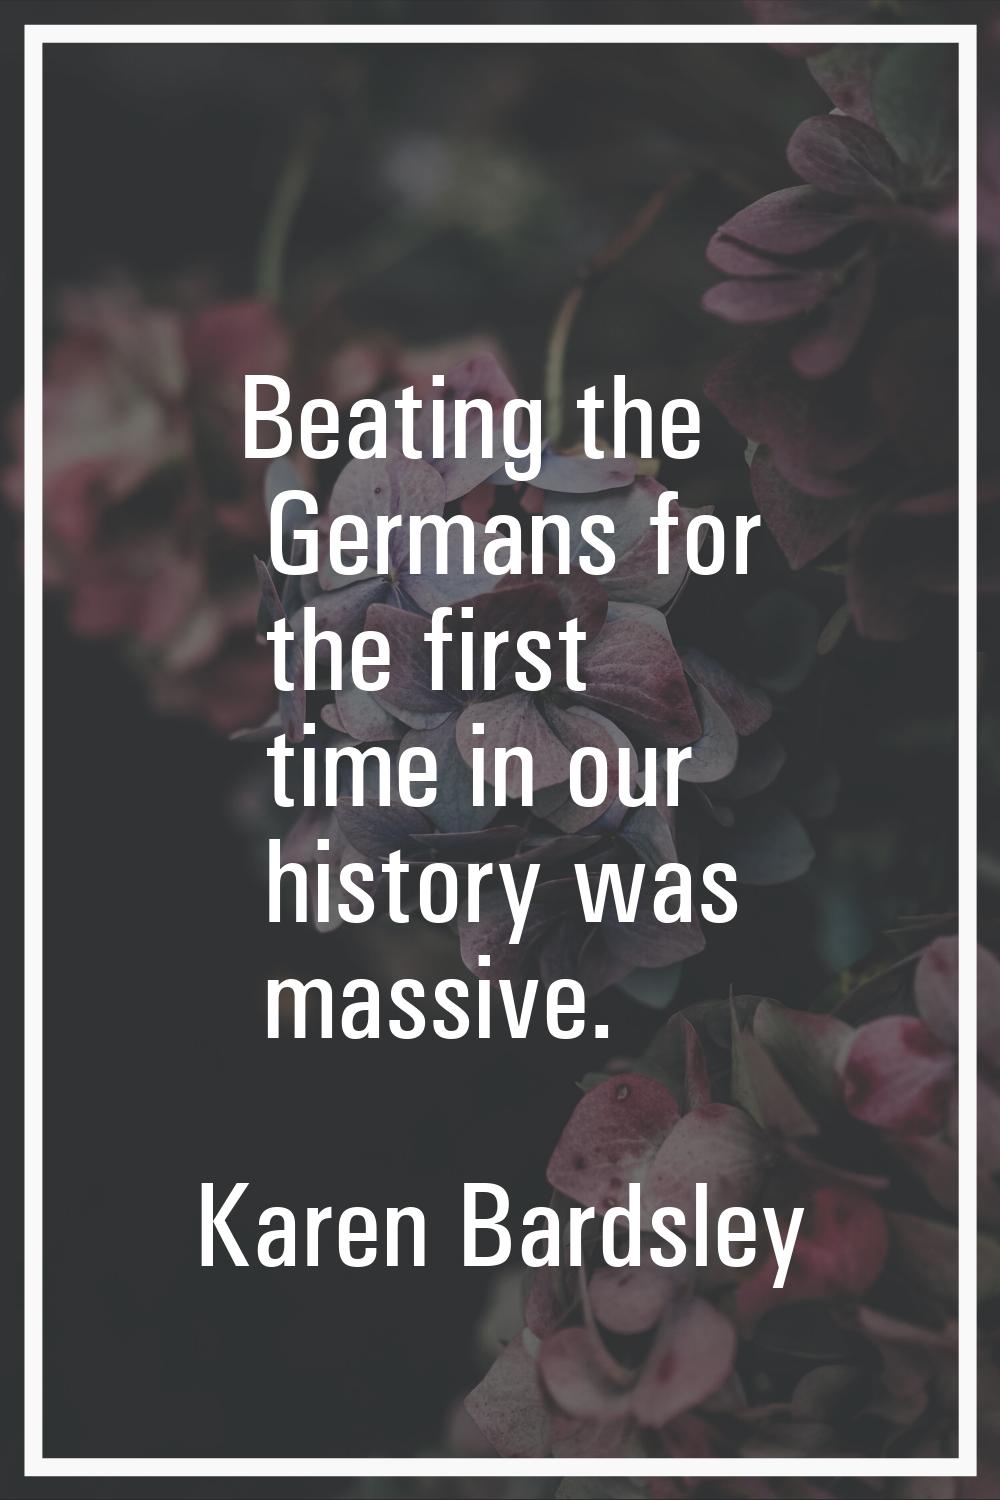 Beating the Germans for the first time in our history was massive.